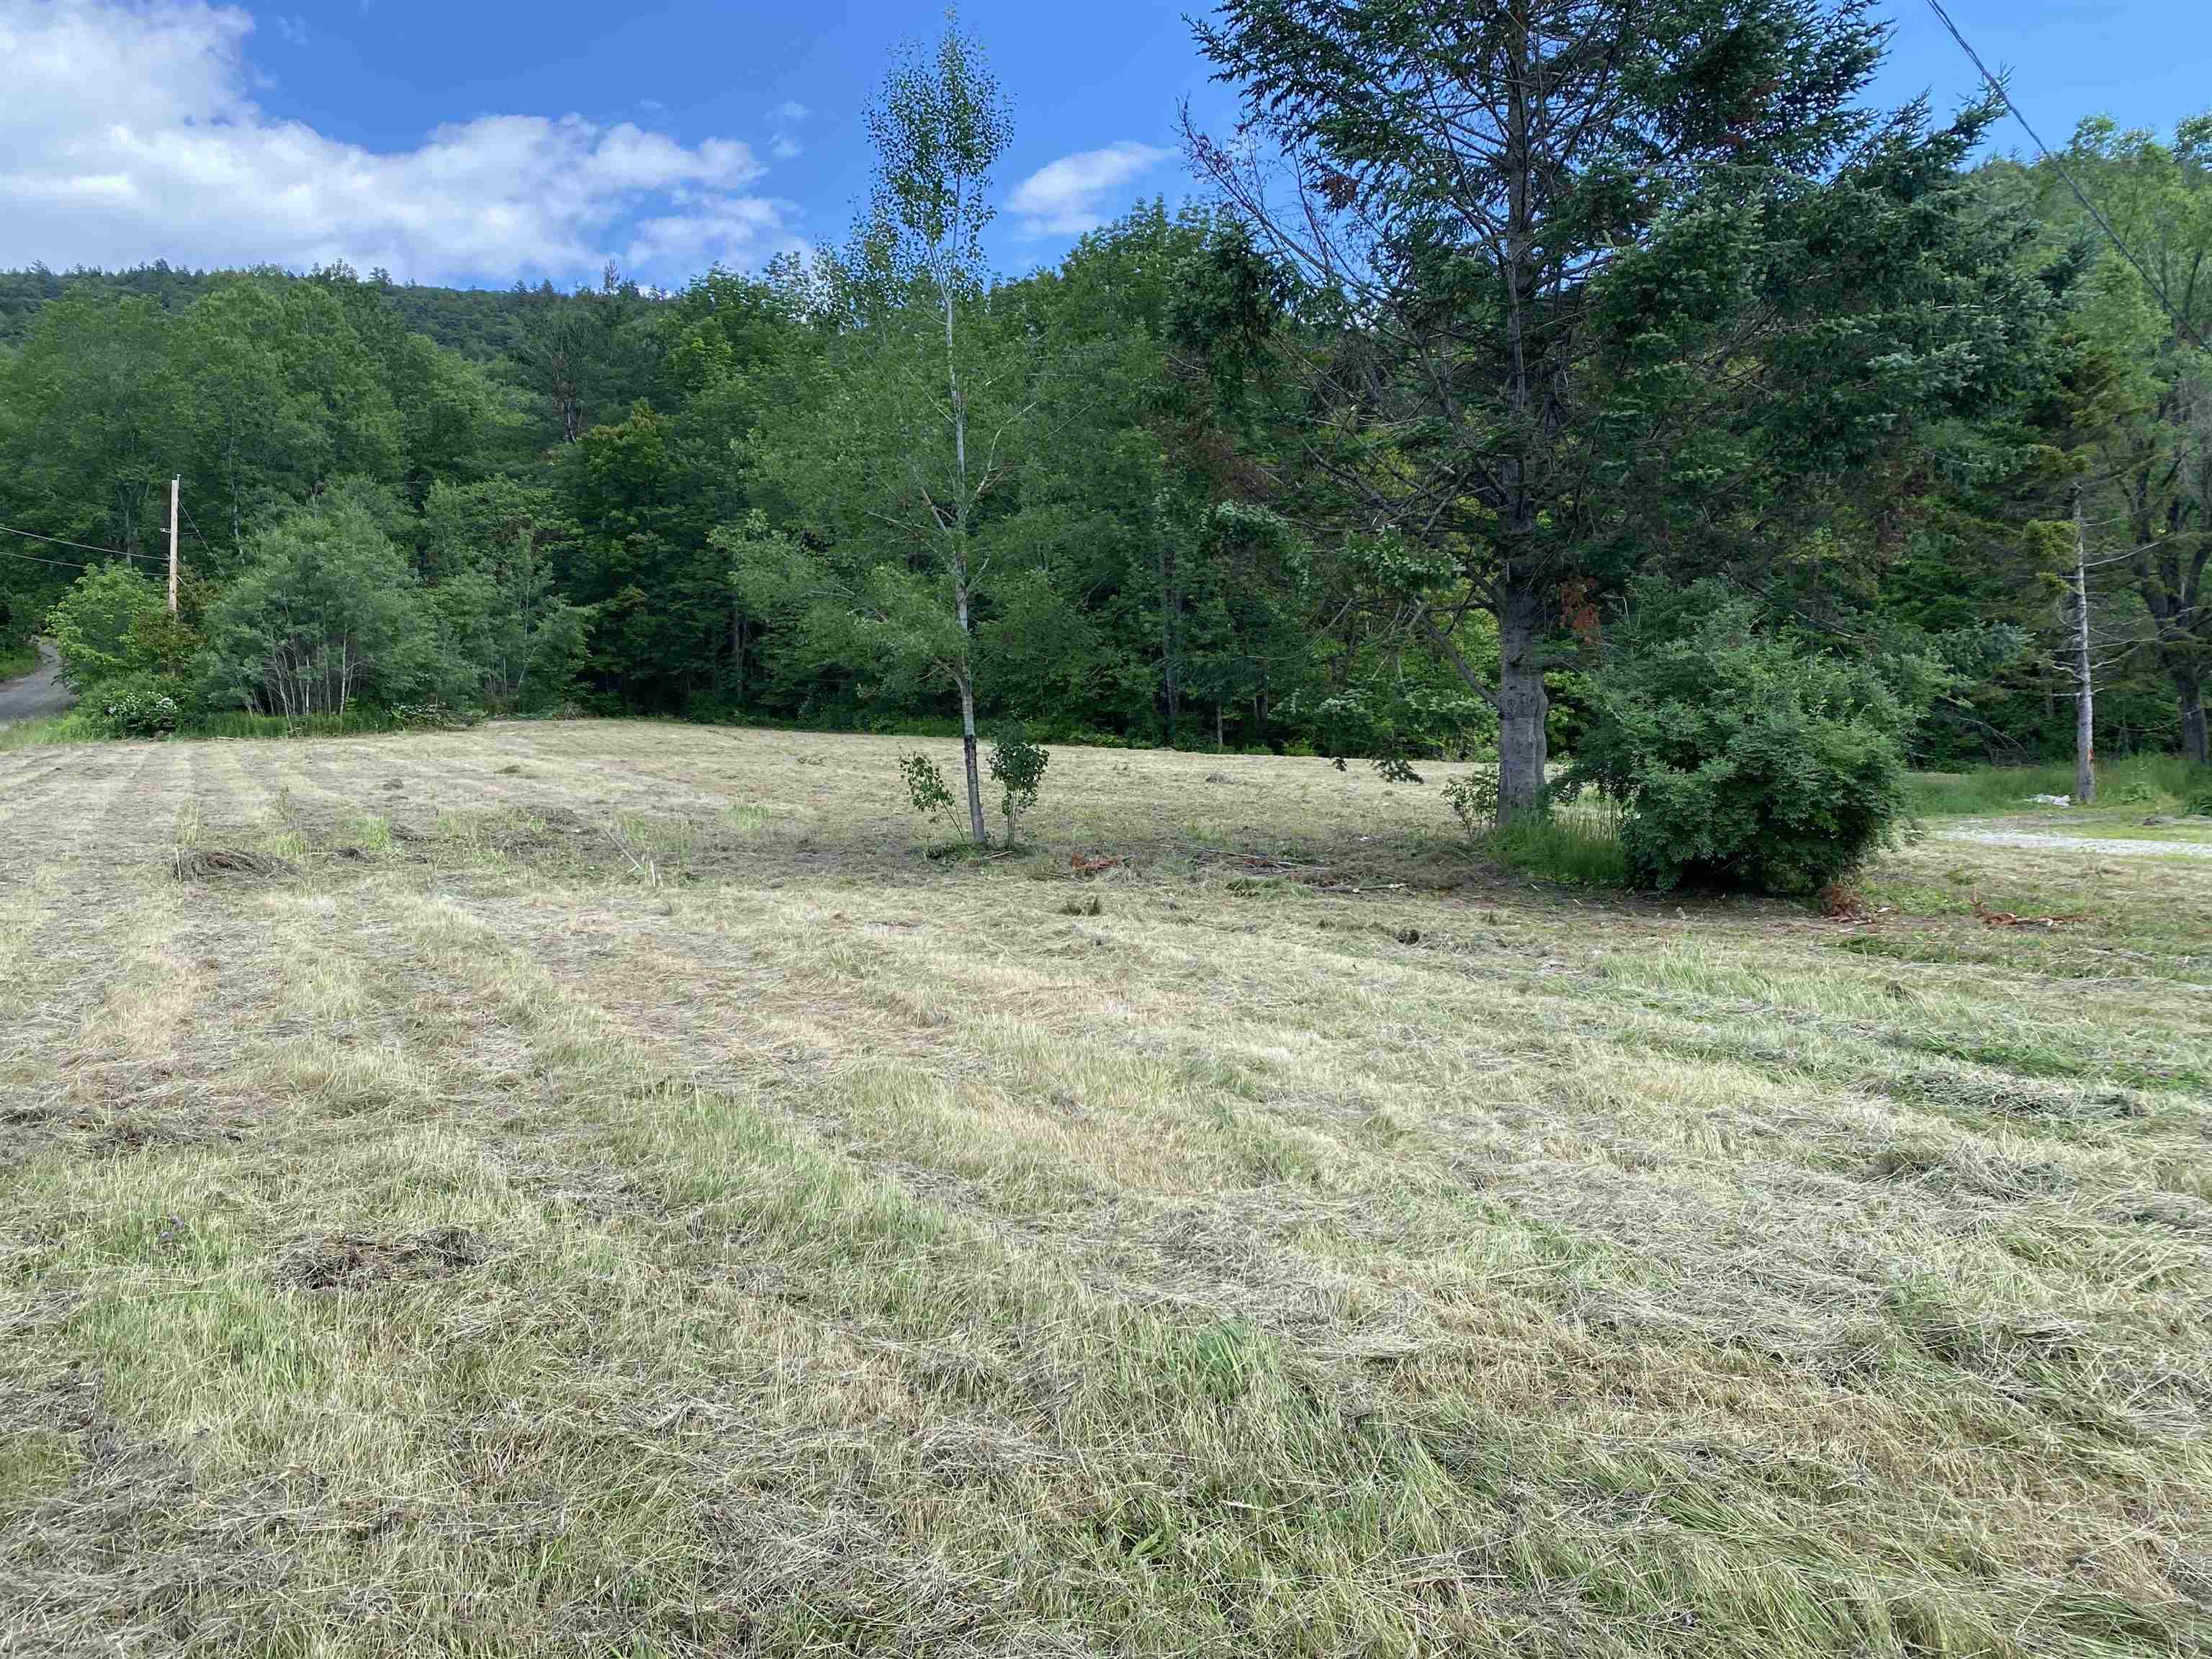 Townshend Vermont ,3.6 acre lot, No zoning , open...